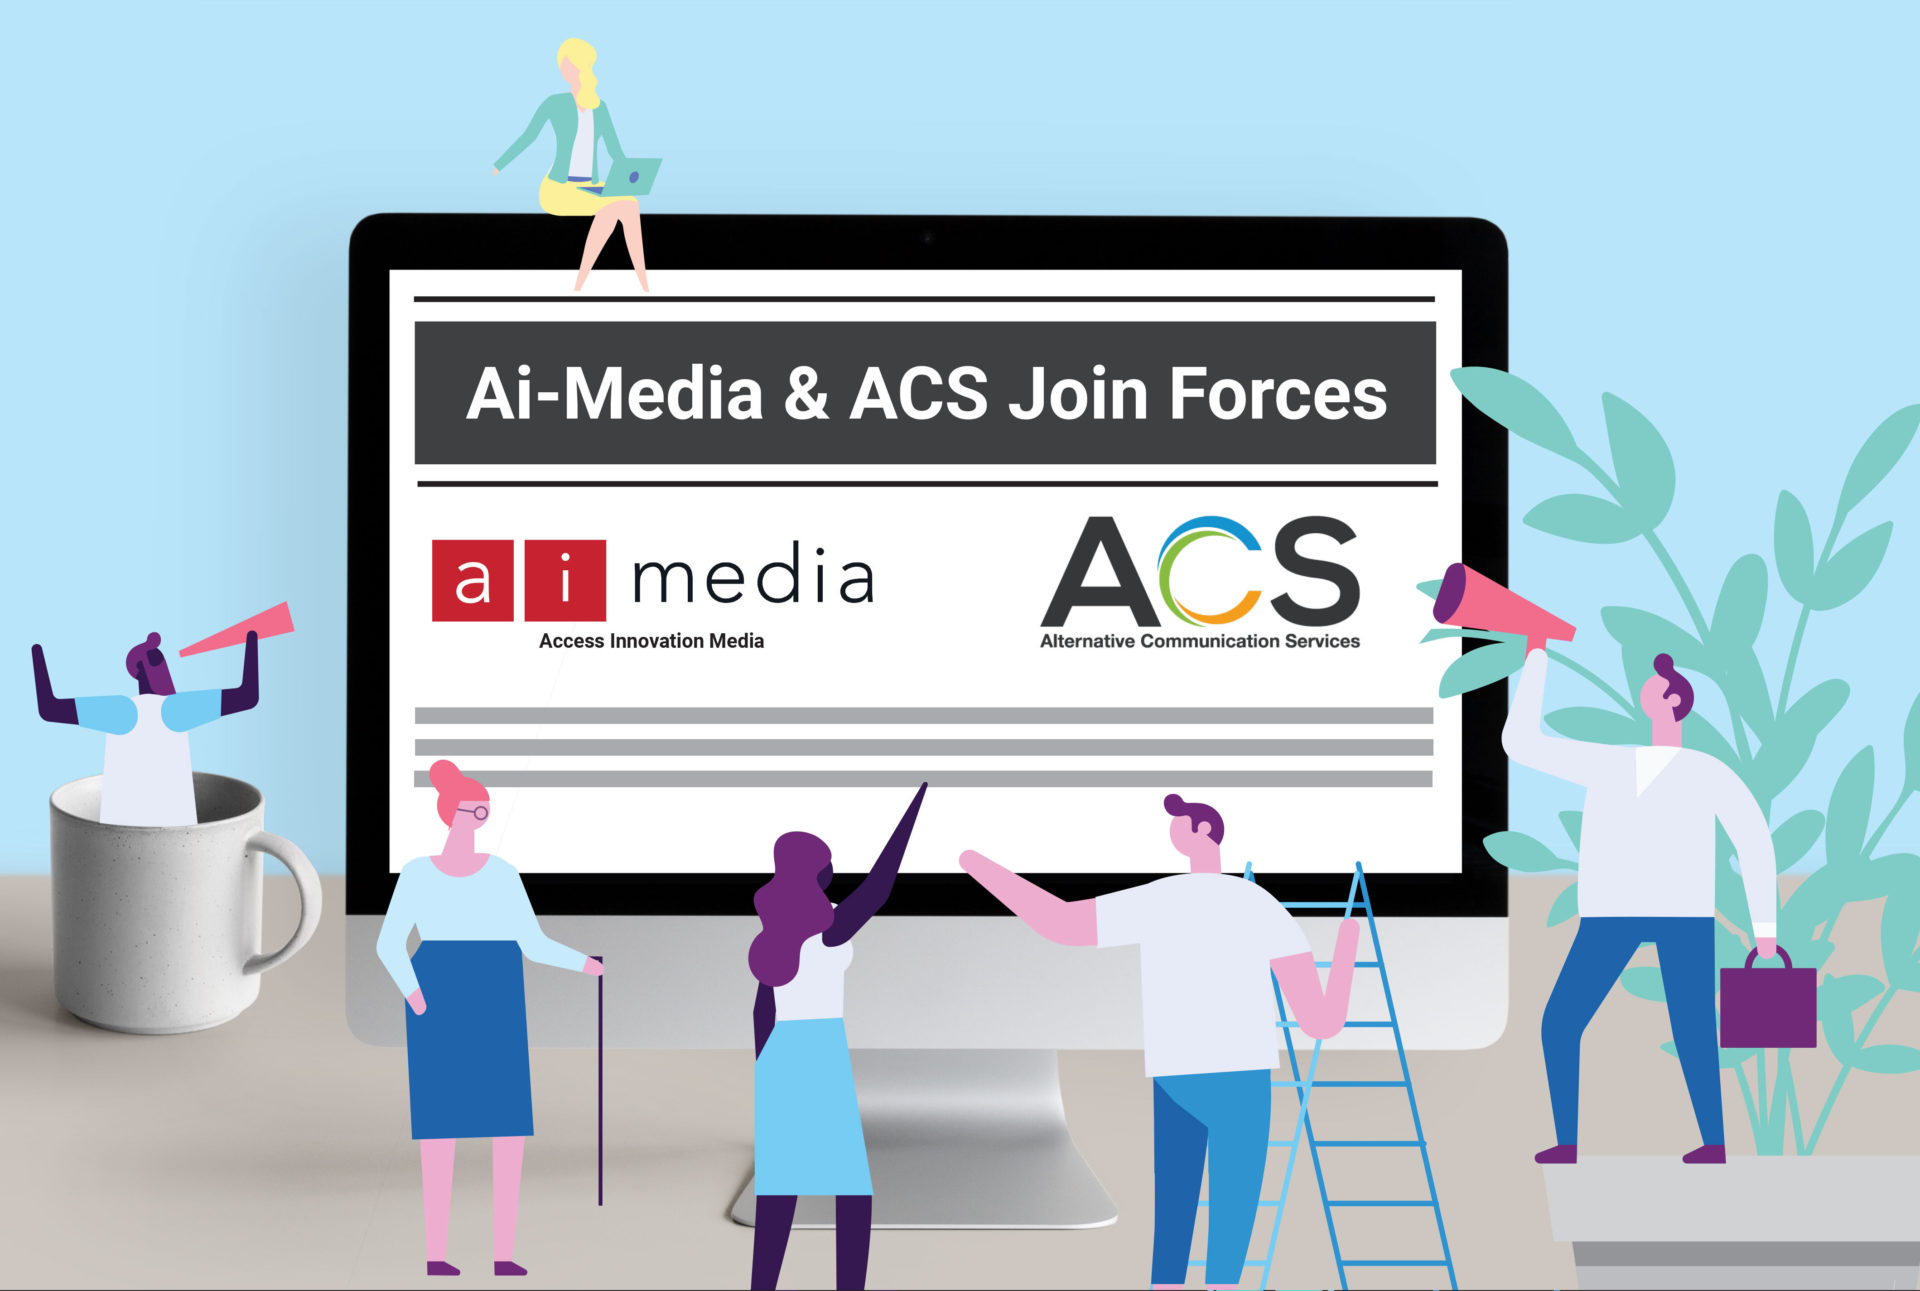 Illustrated image of a computer with a news article open on it. The headlines reads Ái-Media and ACS Join Forces'and it pictures their logos. There are small illustrated people around the computer, some speaking into megaphones and some working and celebrating. There is a plant and a mug on the computer desk.